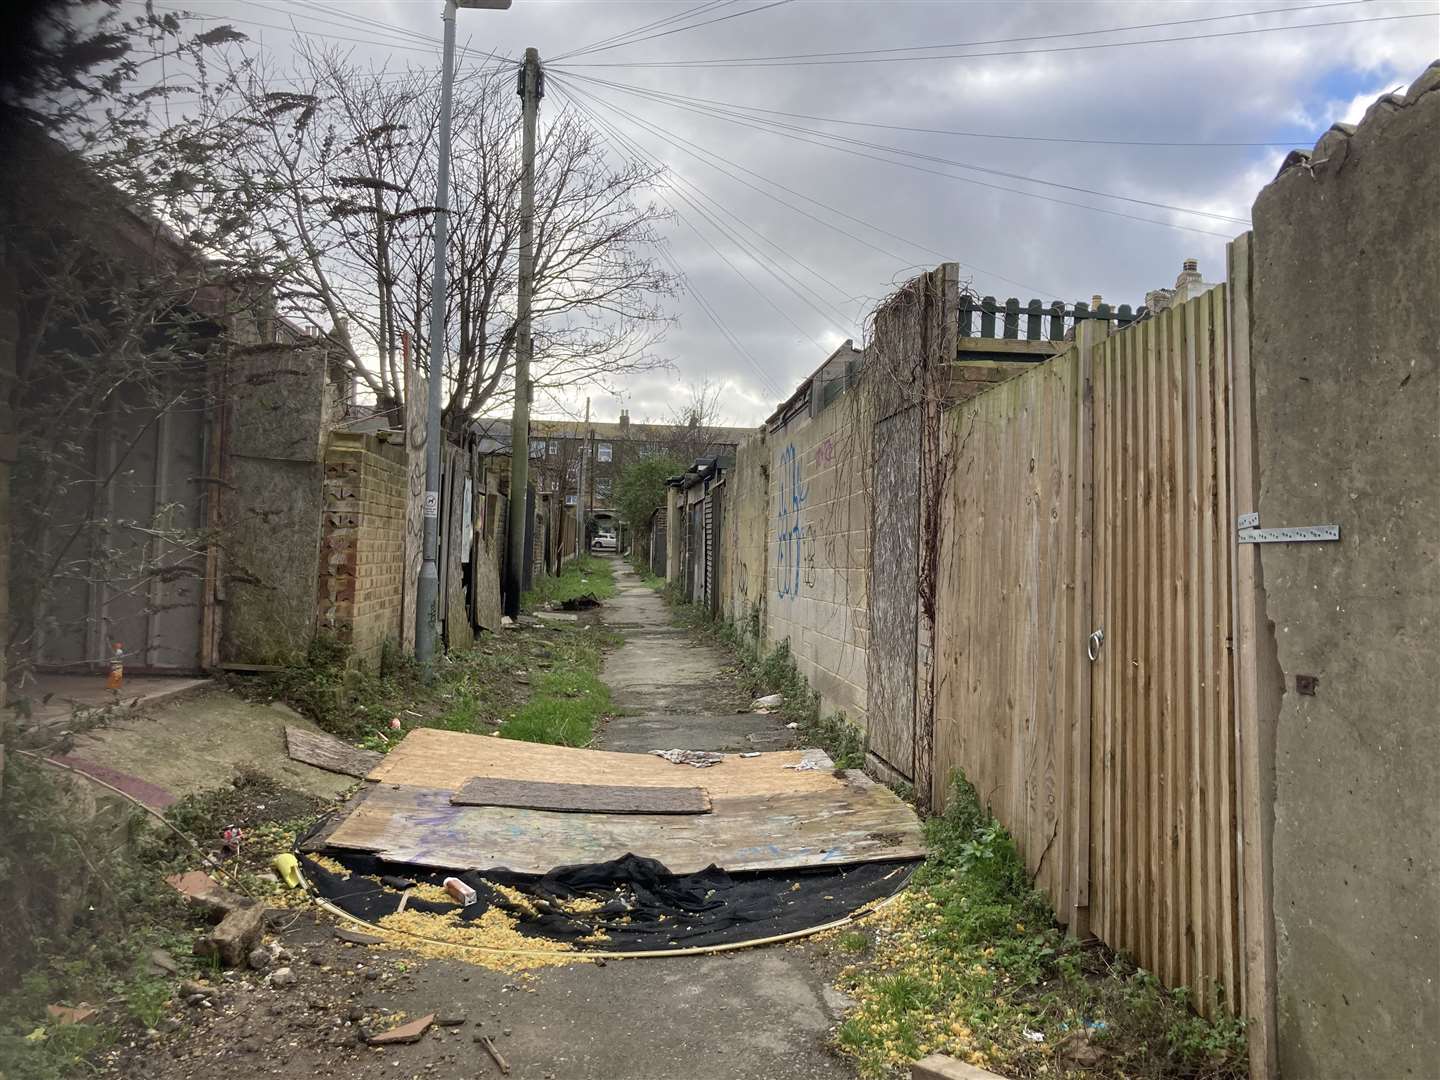 Rubbish is regularly dumped in the alleyway between the Margate routes Athelstan Road and Ethelbert Road